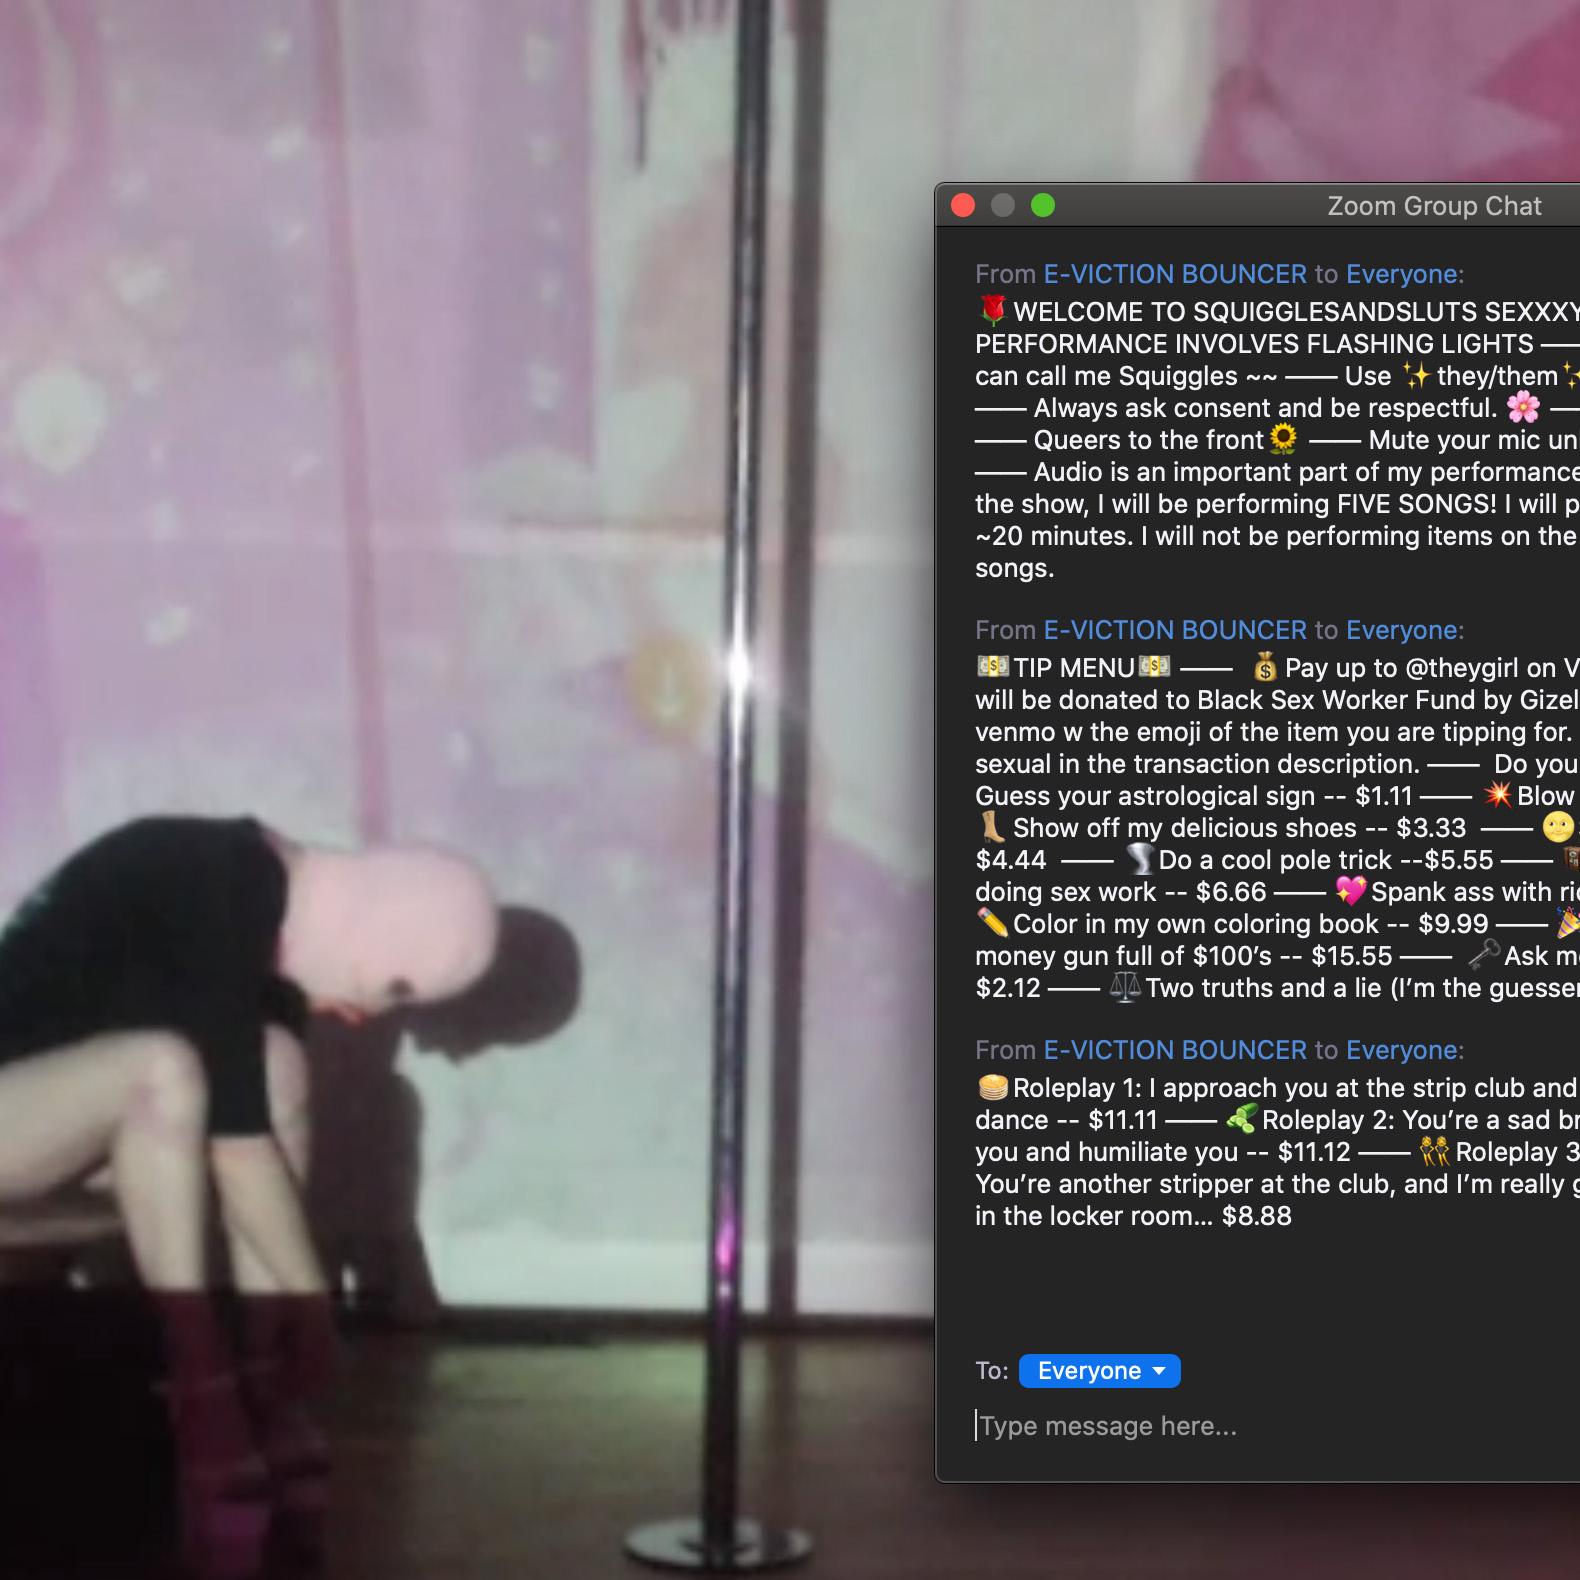 Over a photo of a pink balaclava-clad dancer adjusting their high heel next to a stripper pole, a floating chat window displays innuendo and emoji-laden house rules.